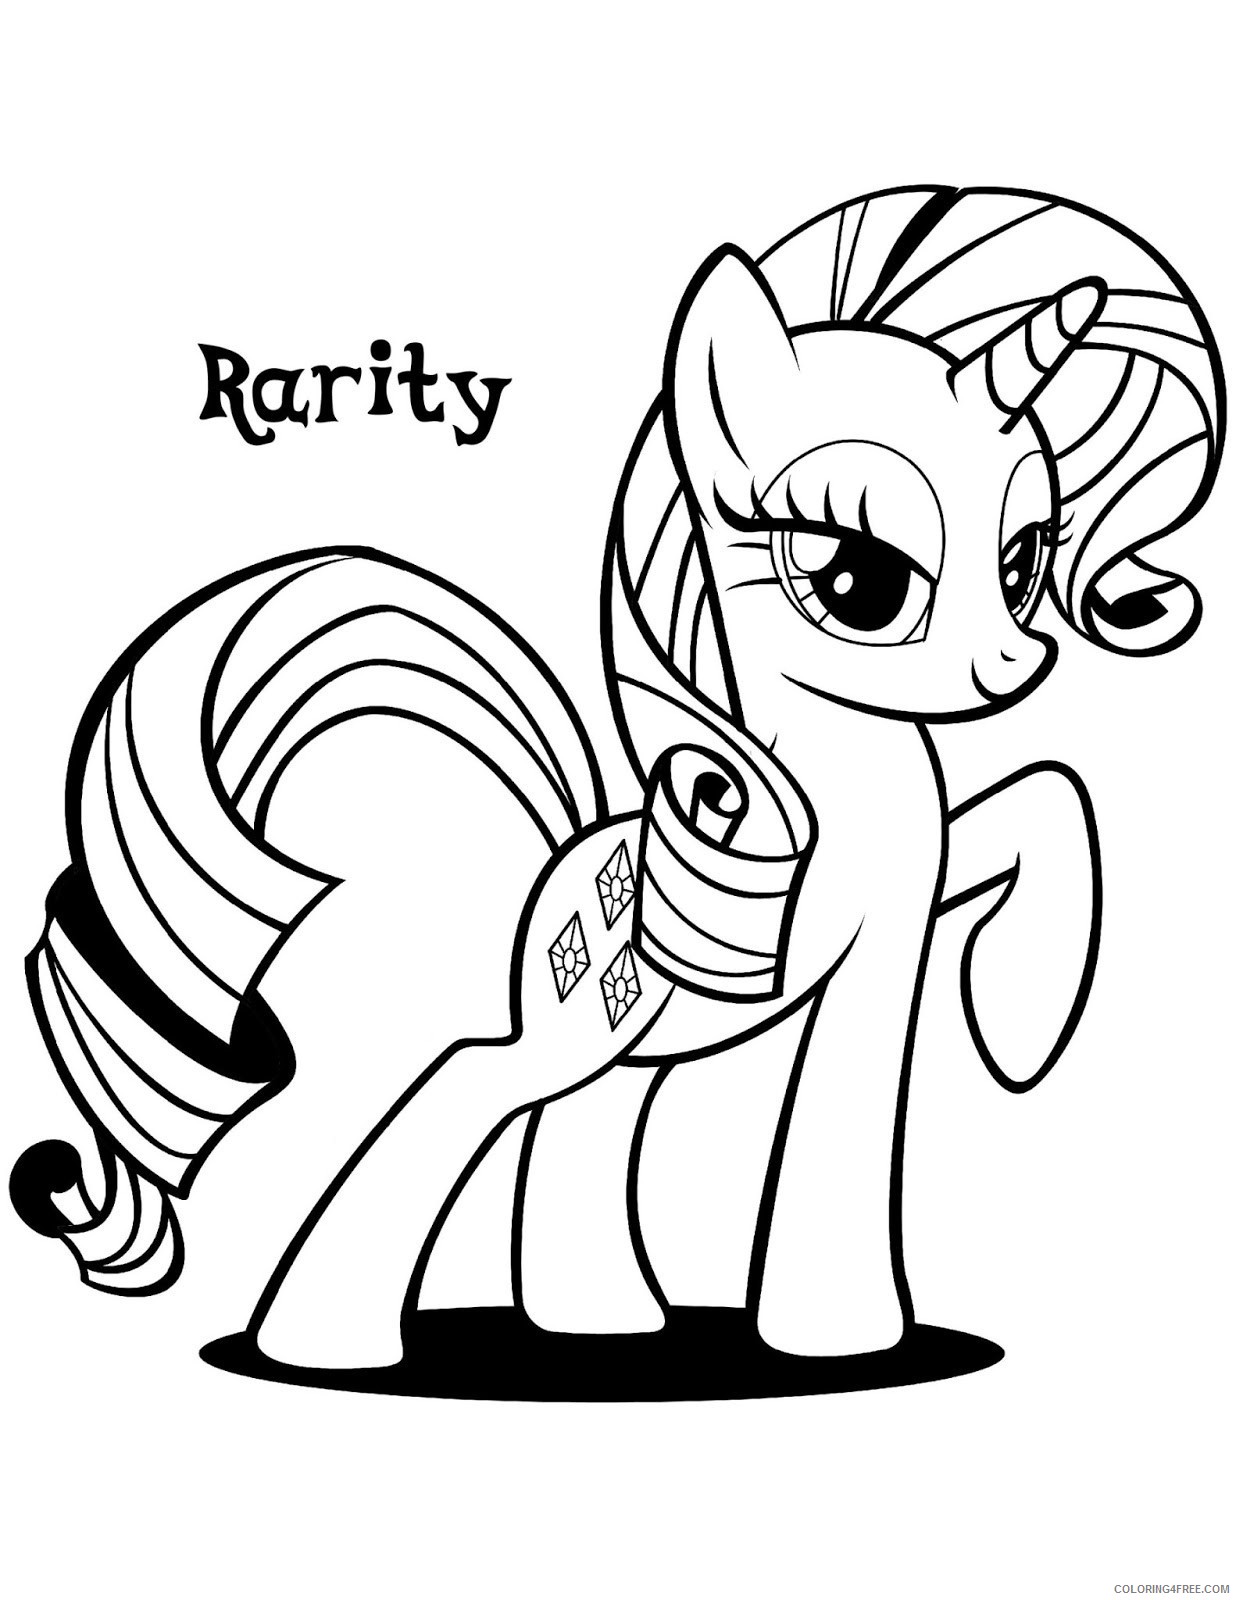 My Little Pony Coloring Pages Cartoons 1545874652_my little pony applejack 1010 Printable 2020 4419 Coloring4free